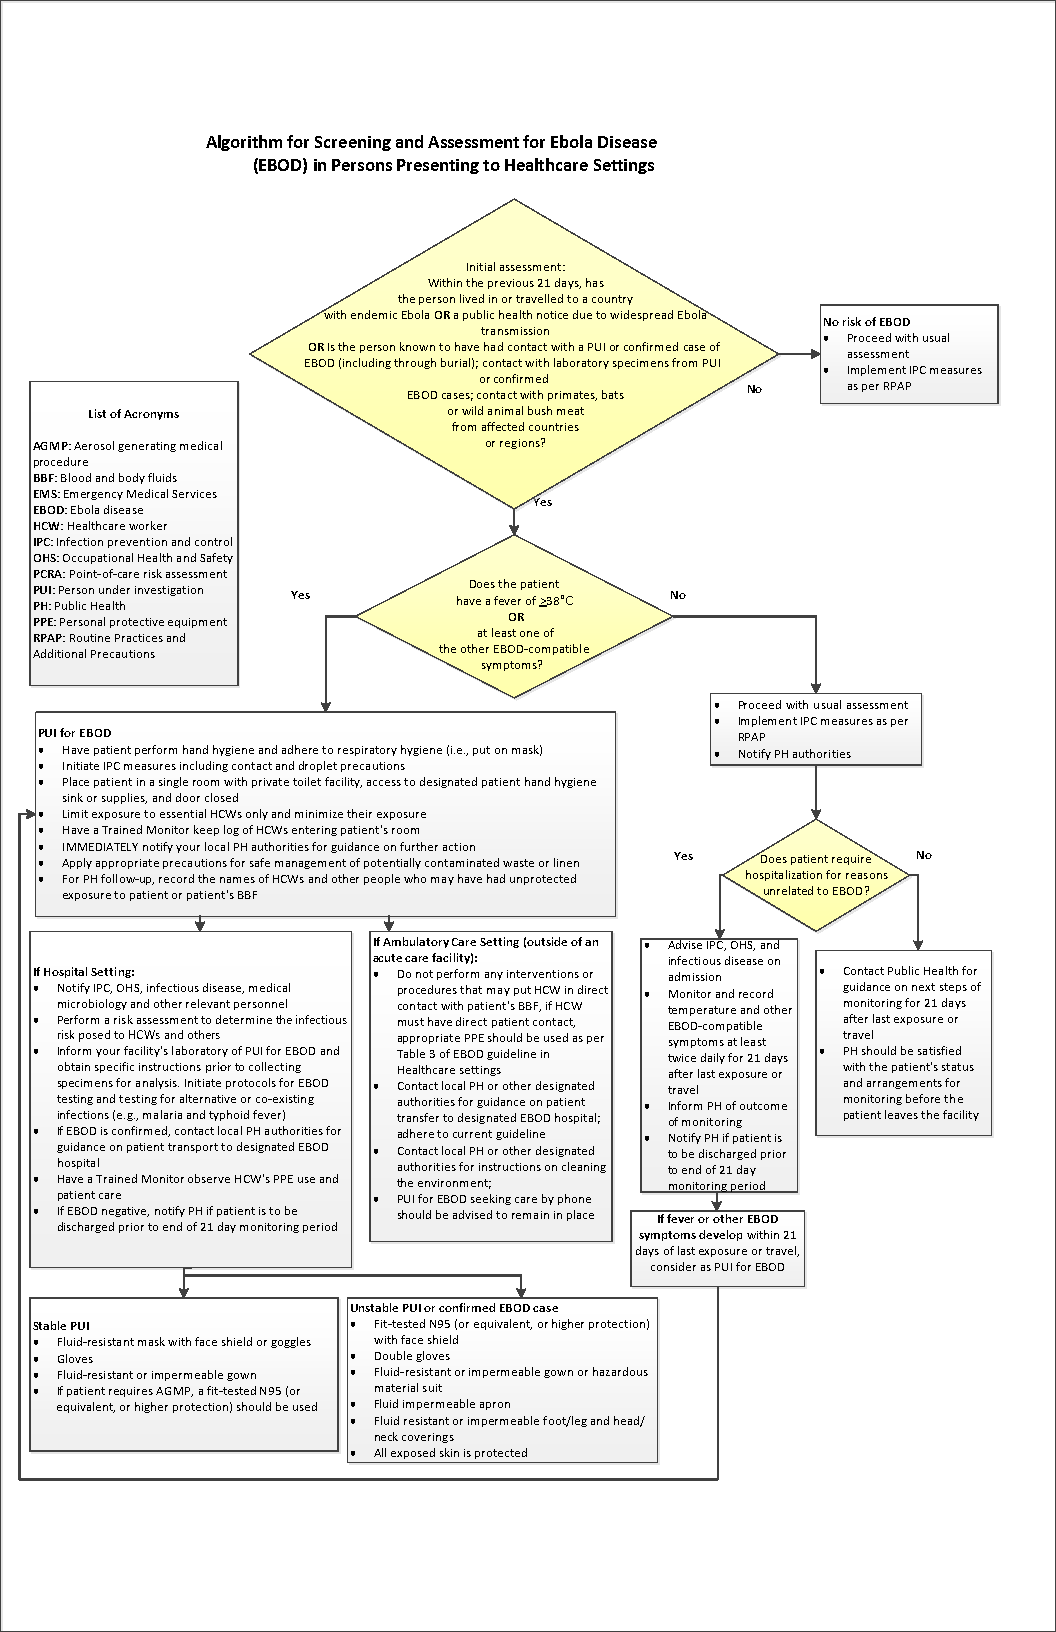 Long description: Appendix B – Algorithm for screening  and assessment for Ebola disease in persons presenting to healthcare settings